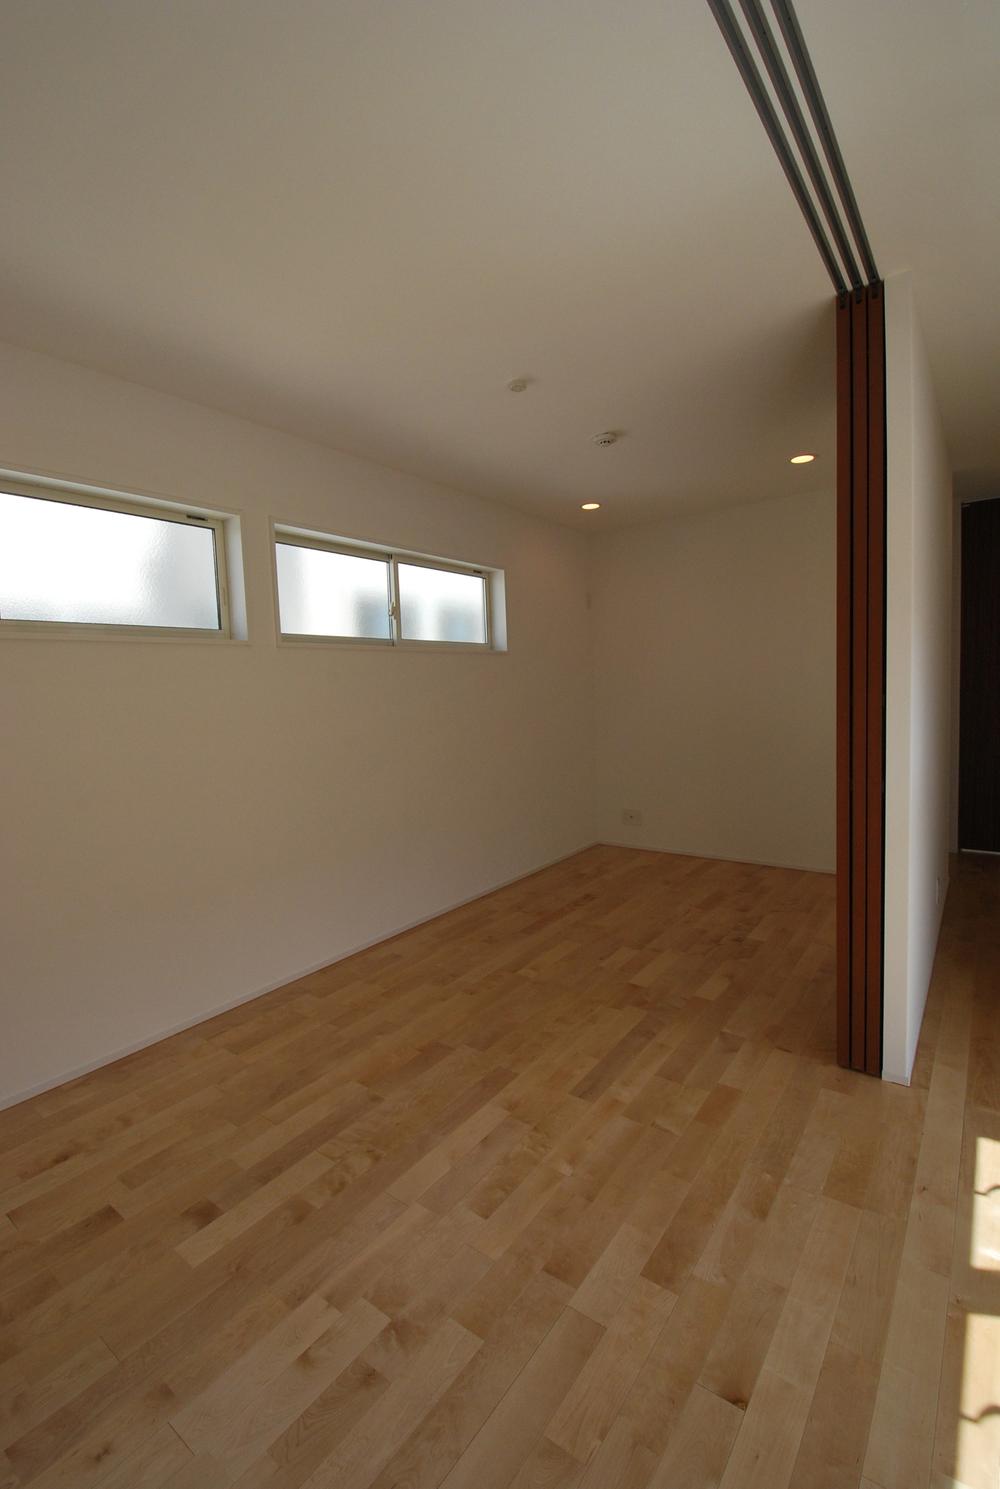 Non-living room. In large opening three pull-door adoption, In private room closed, Available to the spacious space of the hall and integrated open. 